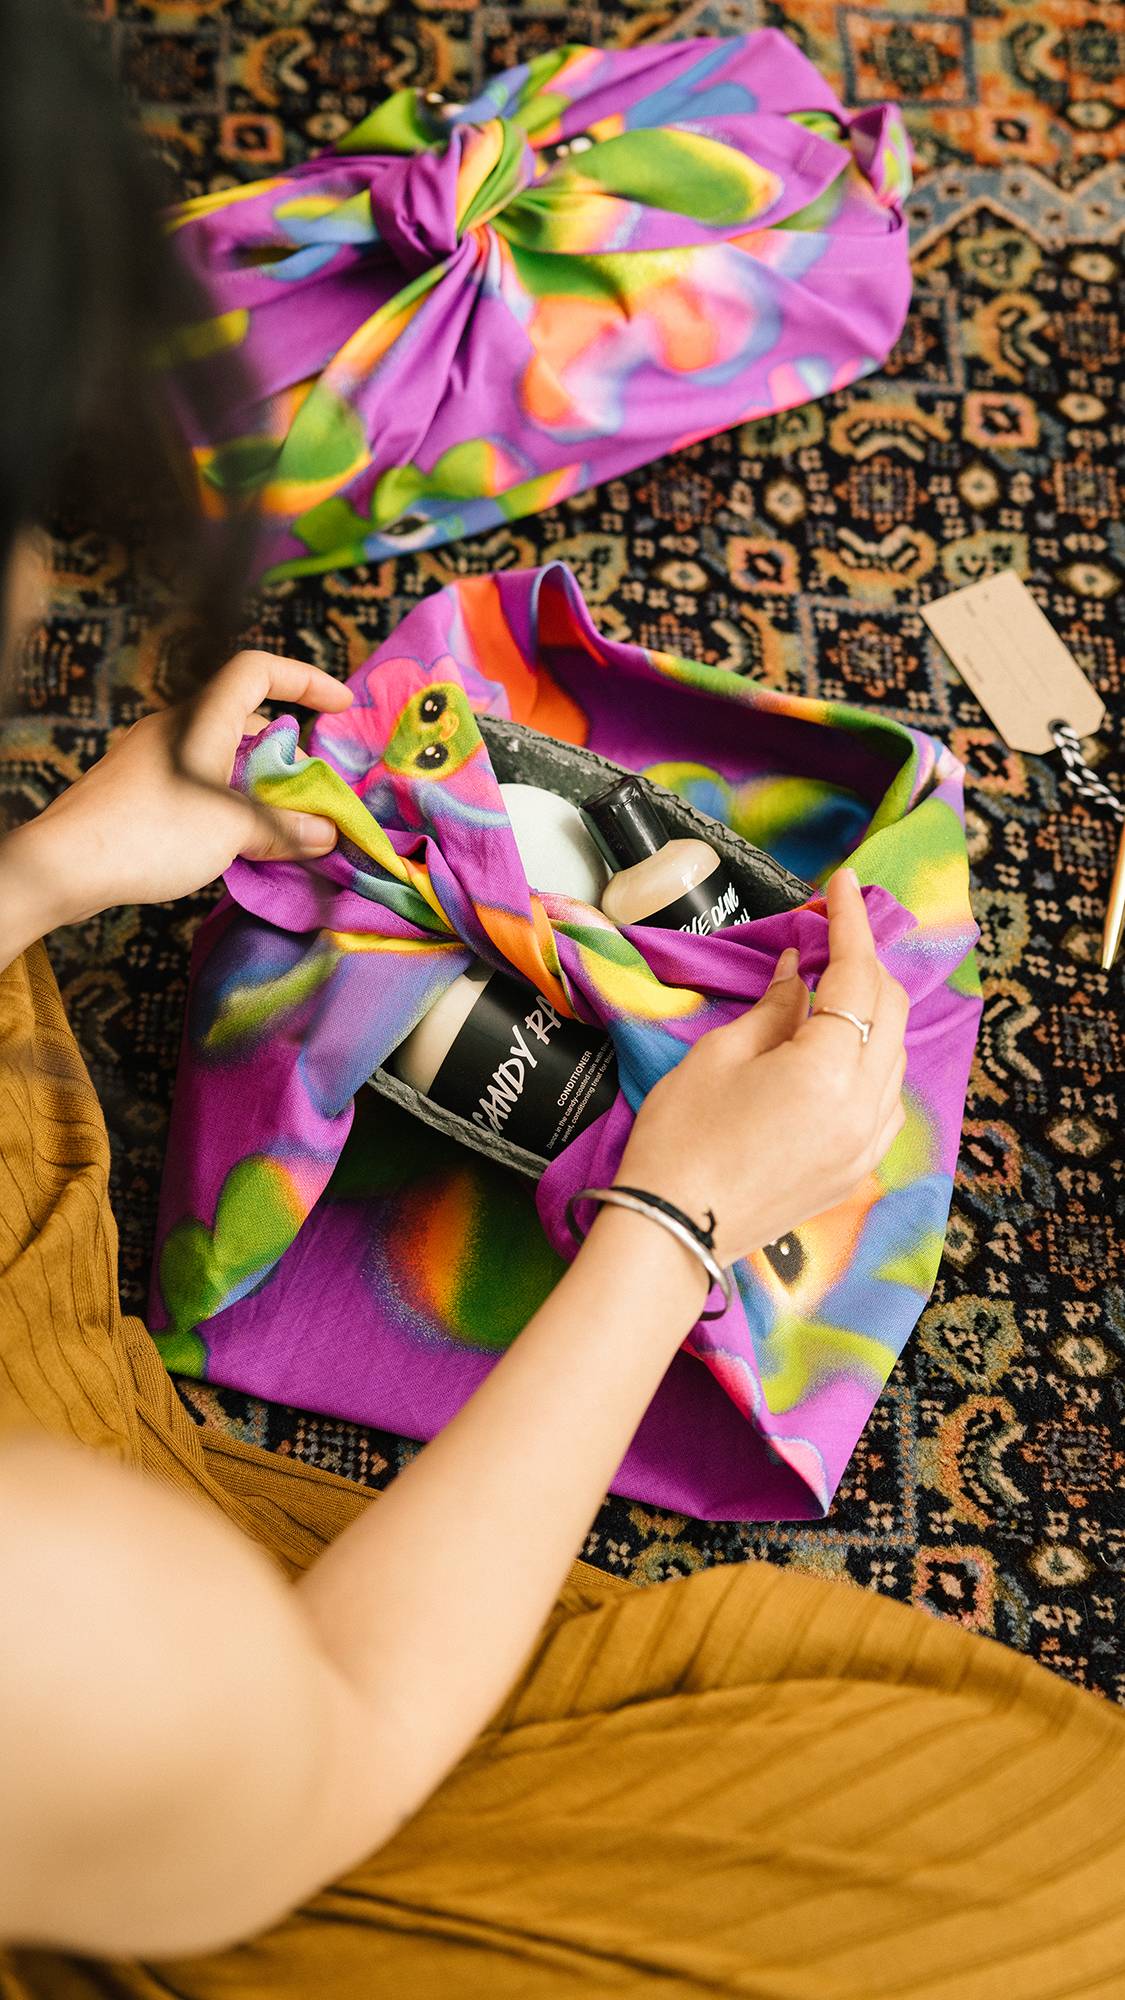 Image shows the model sat on the floor midway through wrapping a LUSH gift with the Soopa Frens colourful knot wrap.